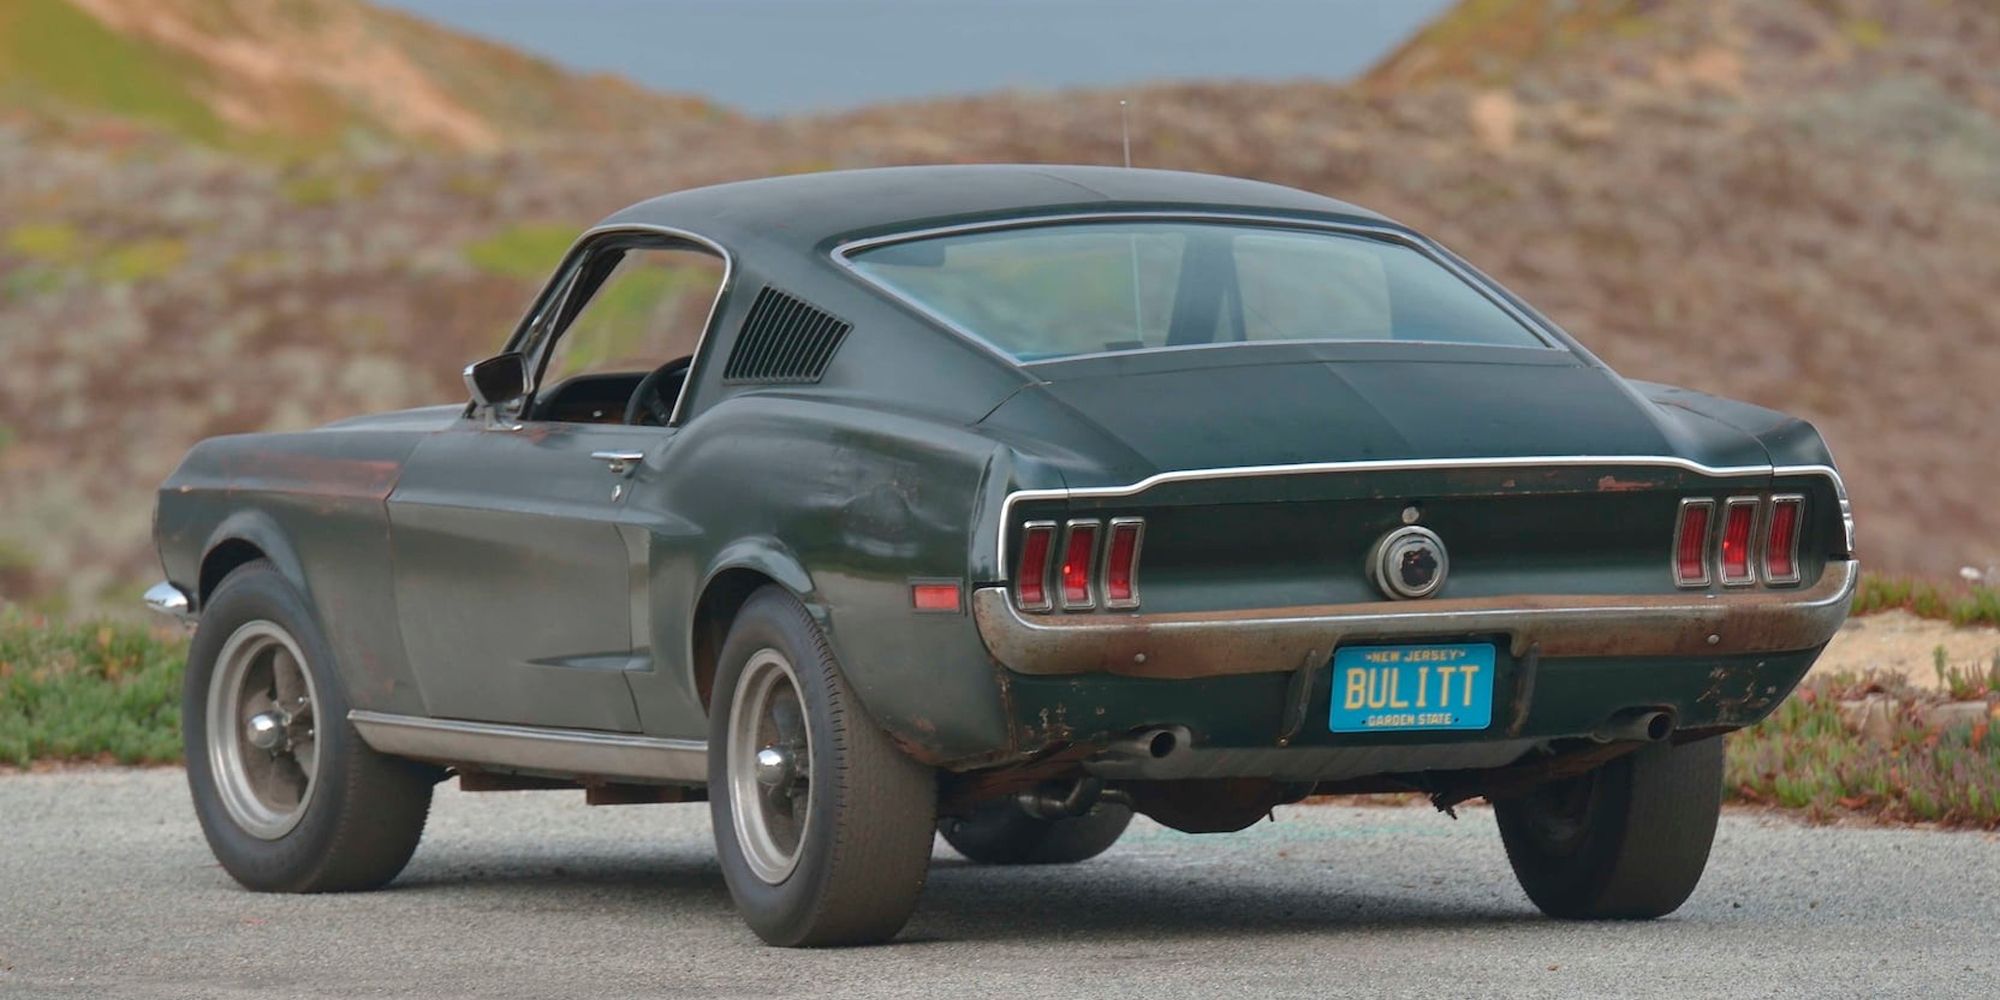 The rear of the rescued Bulitt Mustang